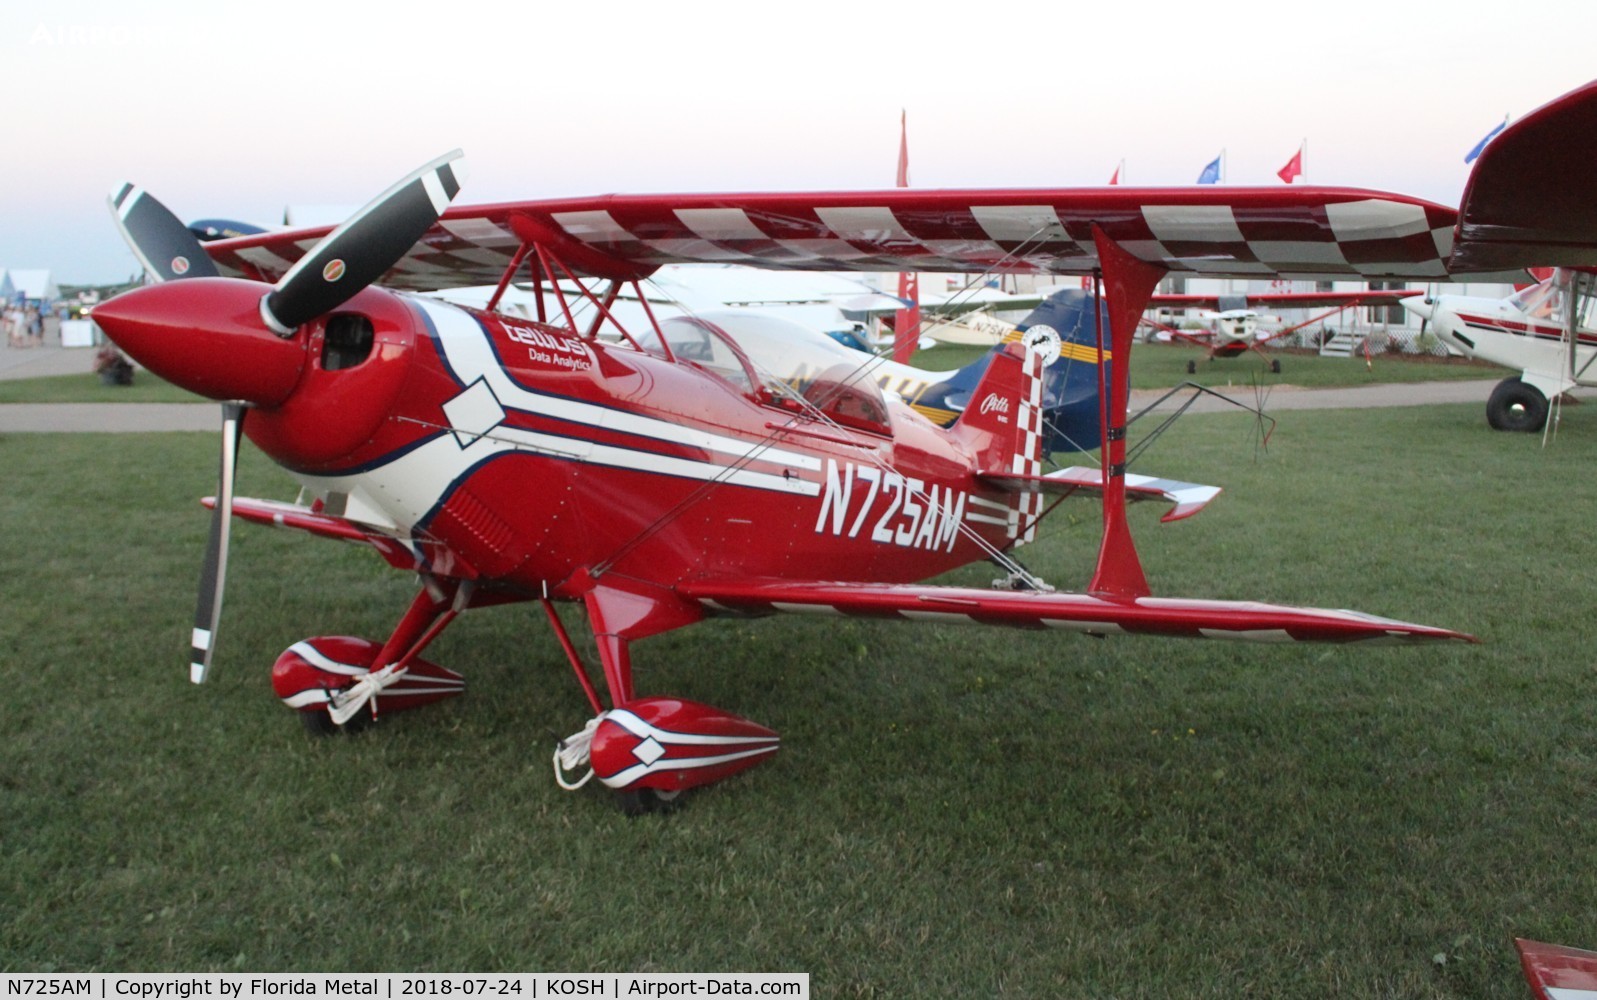 N725AM, 2017 Aviat Pitts S-2C Special Special C/N 6092, Pitts S-2C